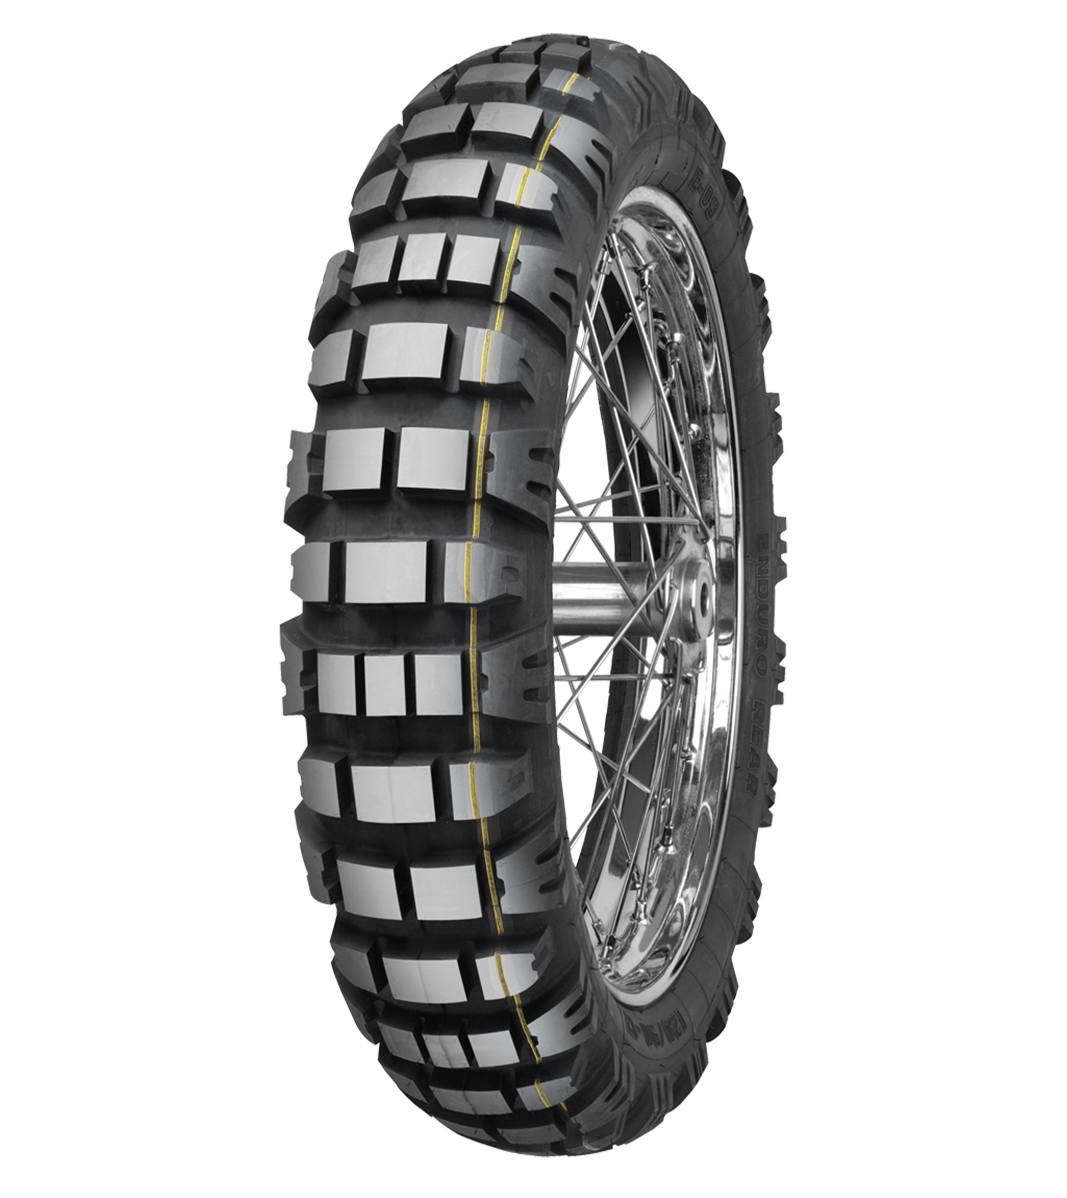 Mitas E-09 ENDURO 140/80-18 Trail OFF Trail DAKAR 70R Yellow Tubeless Rear Tire, 224176, 140/80-18, Adventure Touring, E Series, E-09 Enduro, Rear, Trail, Trail OFF, Tires - Imported and distributed in North &amp; South America by Lindeco Genuine Powersports - Premier Powersports Equipment and Accessories for Motorcycle Enthusiasts, Professional Riders and Dealers.